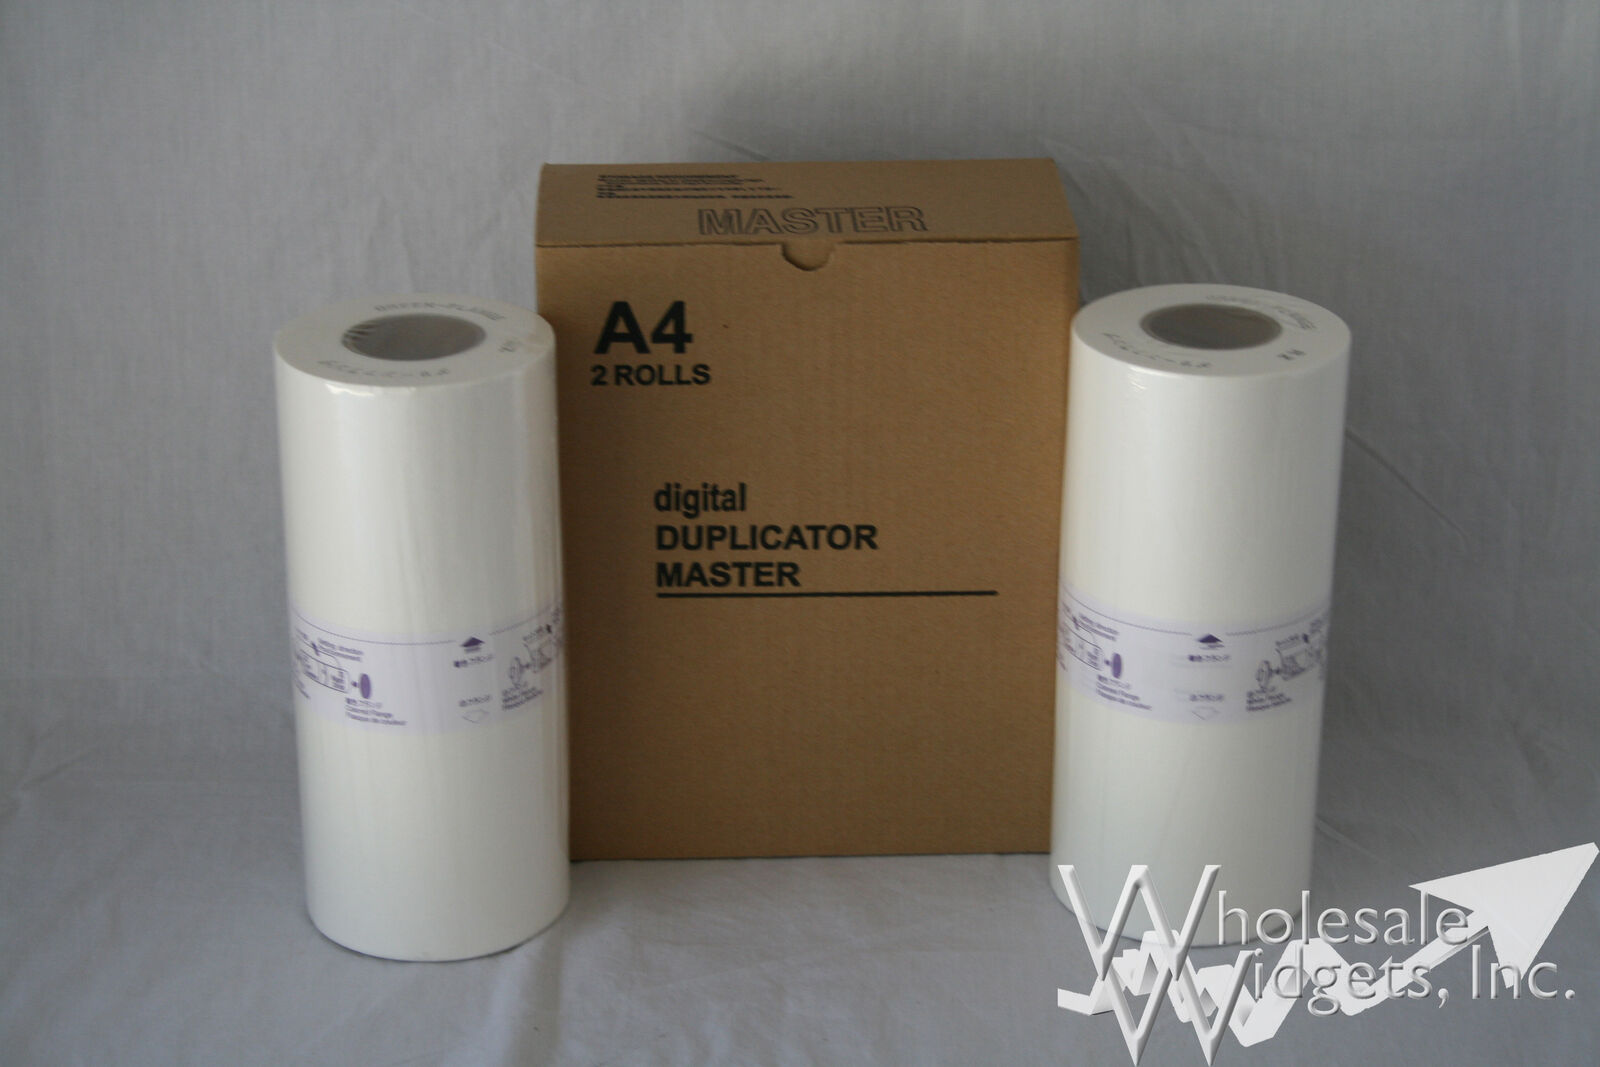 2 Wholesale Widgets Brand S-8188 Master Rolls. Compatible with Riso S4250 S8188